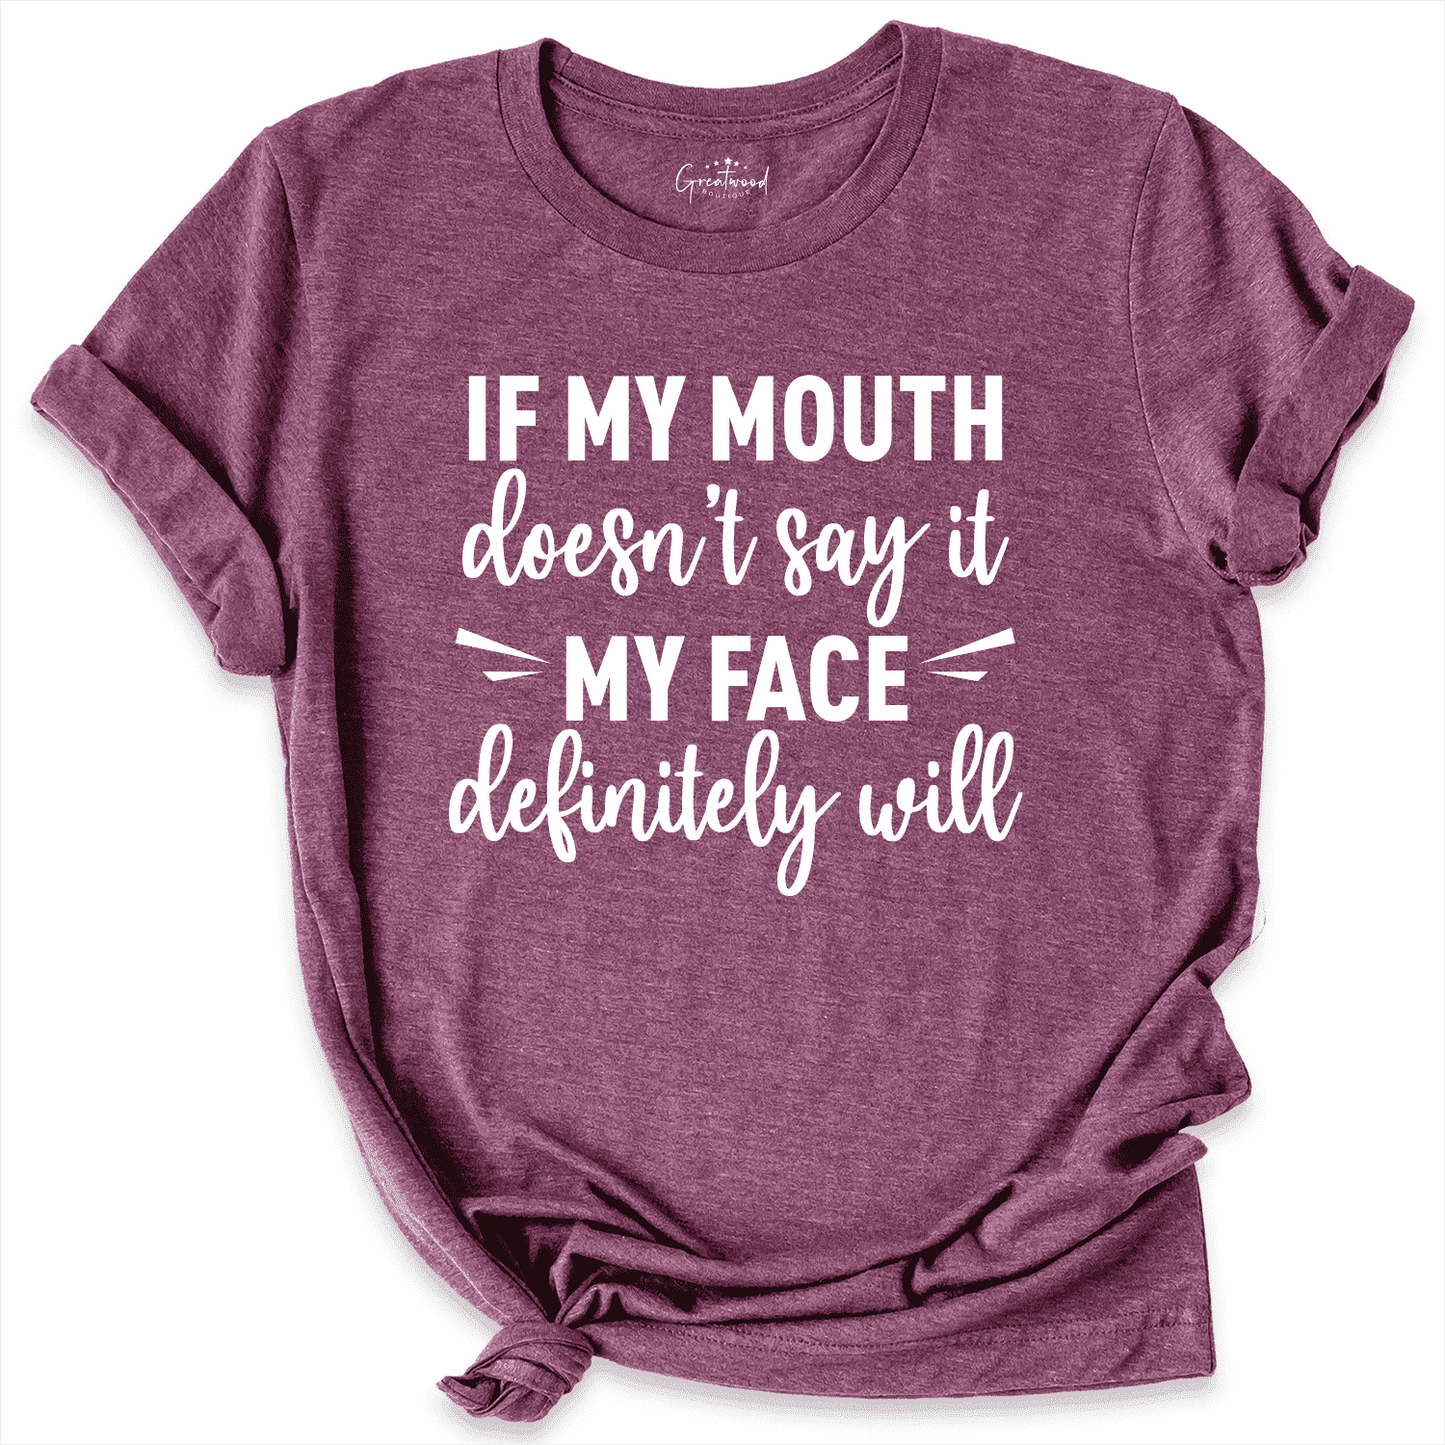 If My Mouth Doesn't Say It My Face Definitely Will Shirt Maroon - Greatwood Boutique